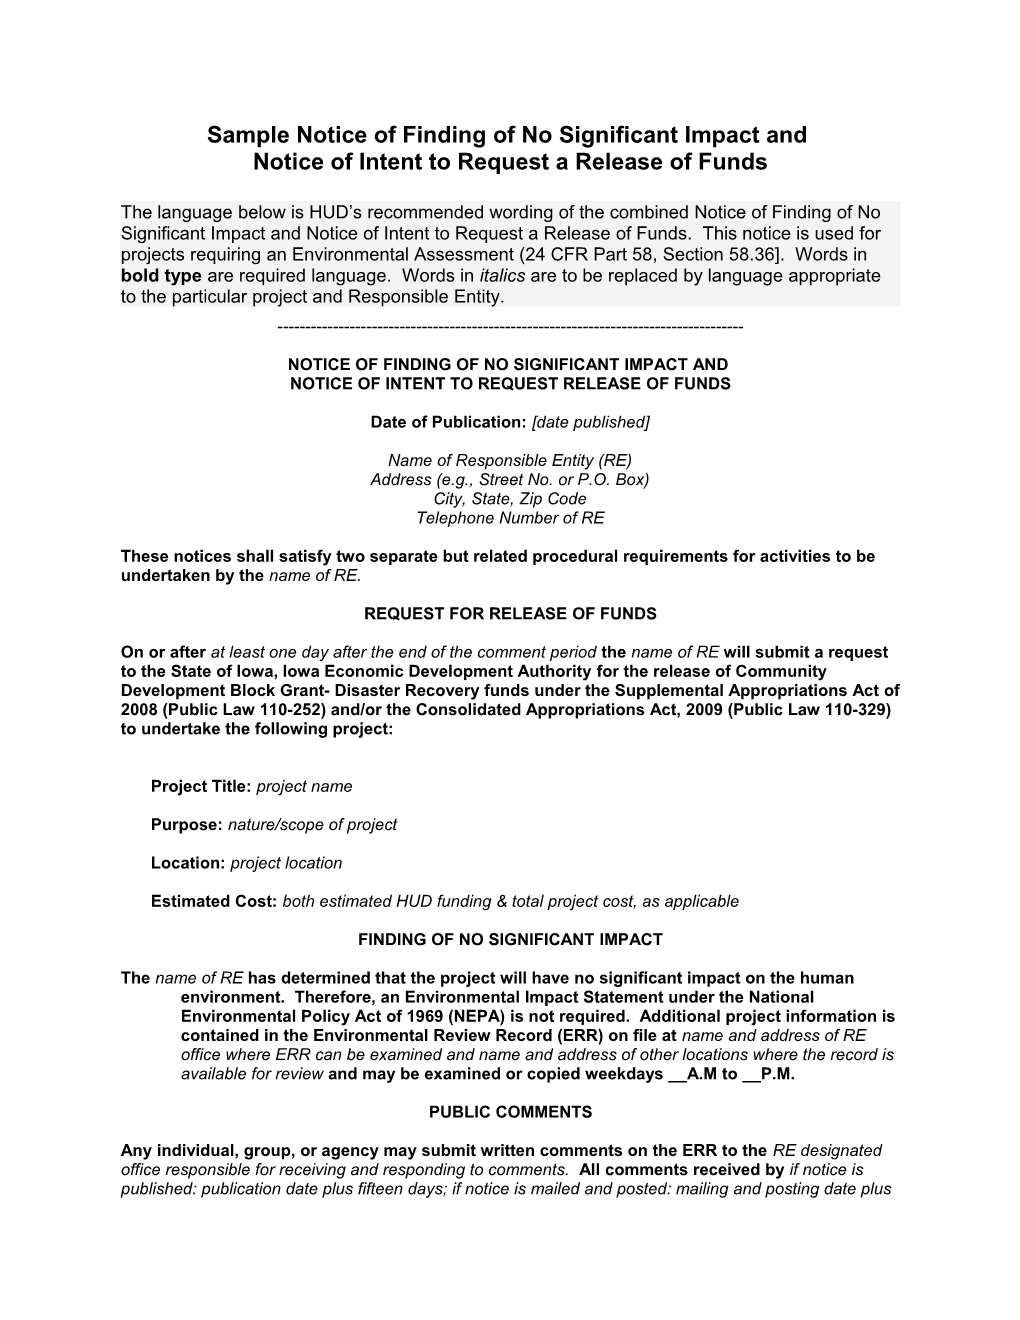 Sample Notice of Finding of No Significant Impact And